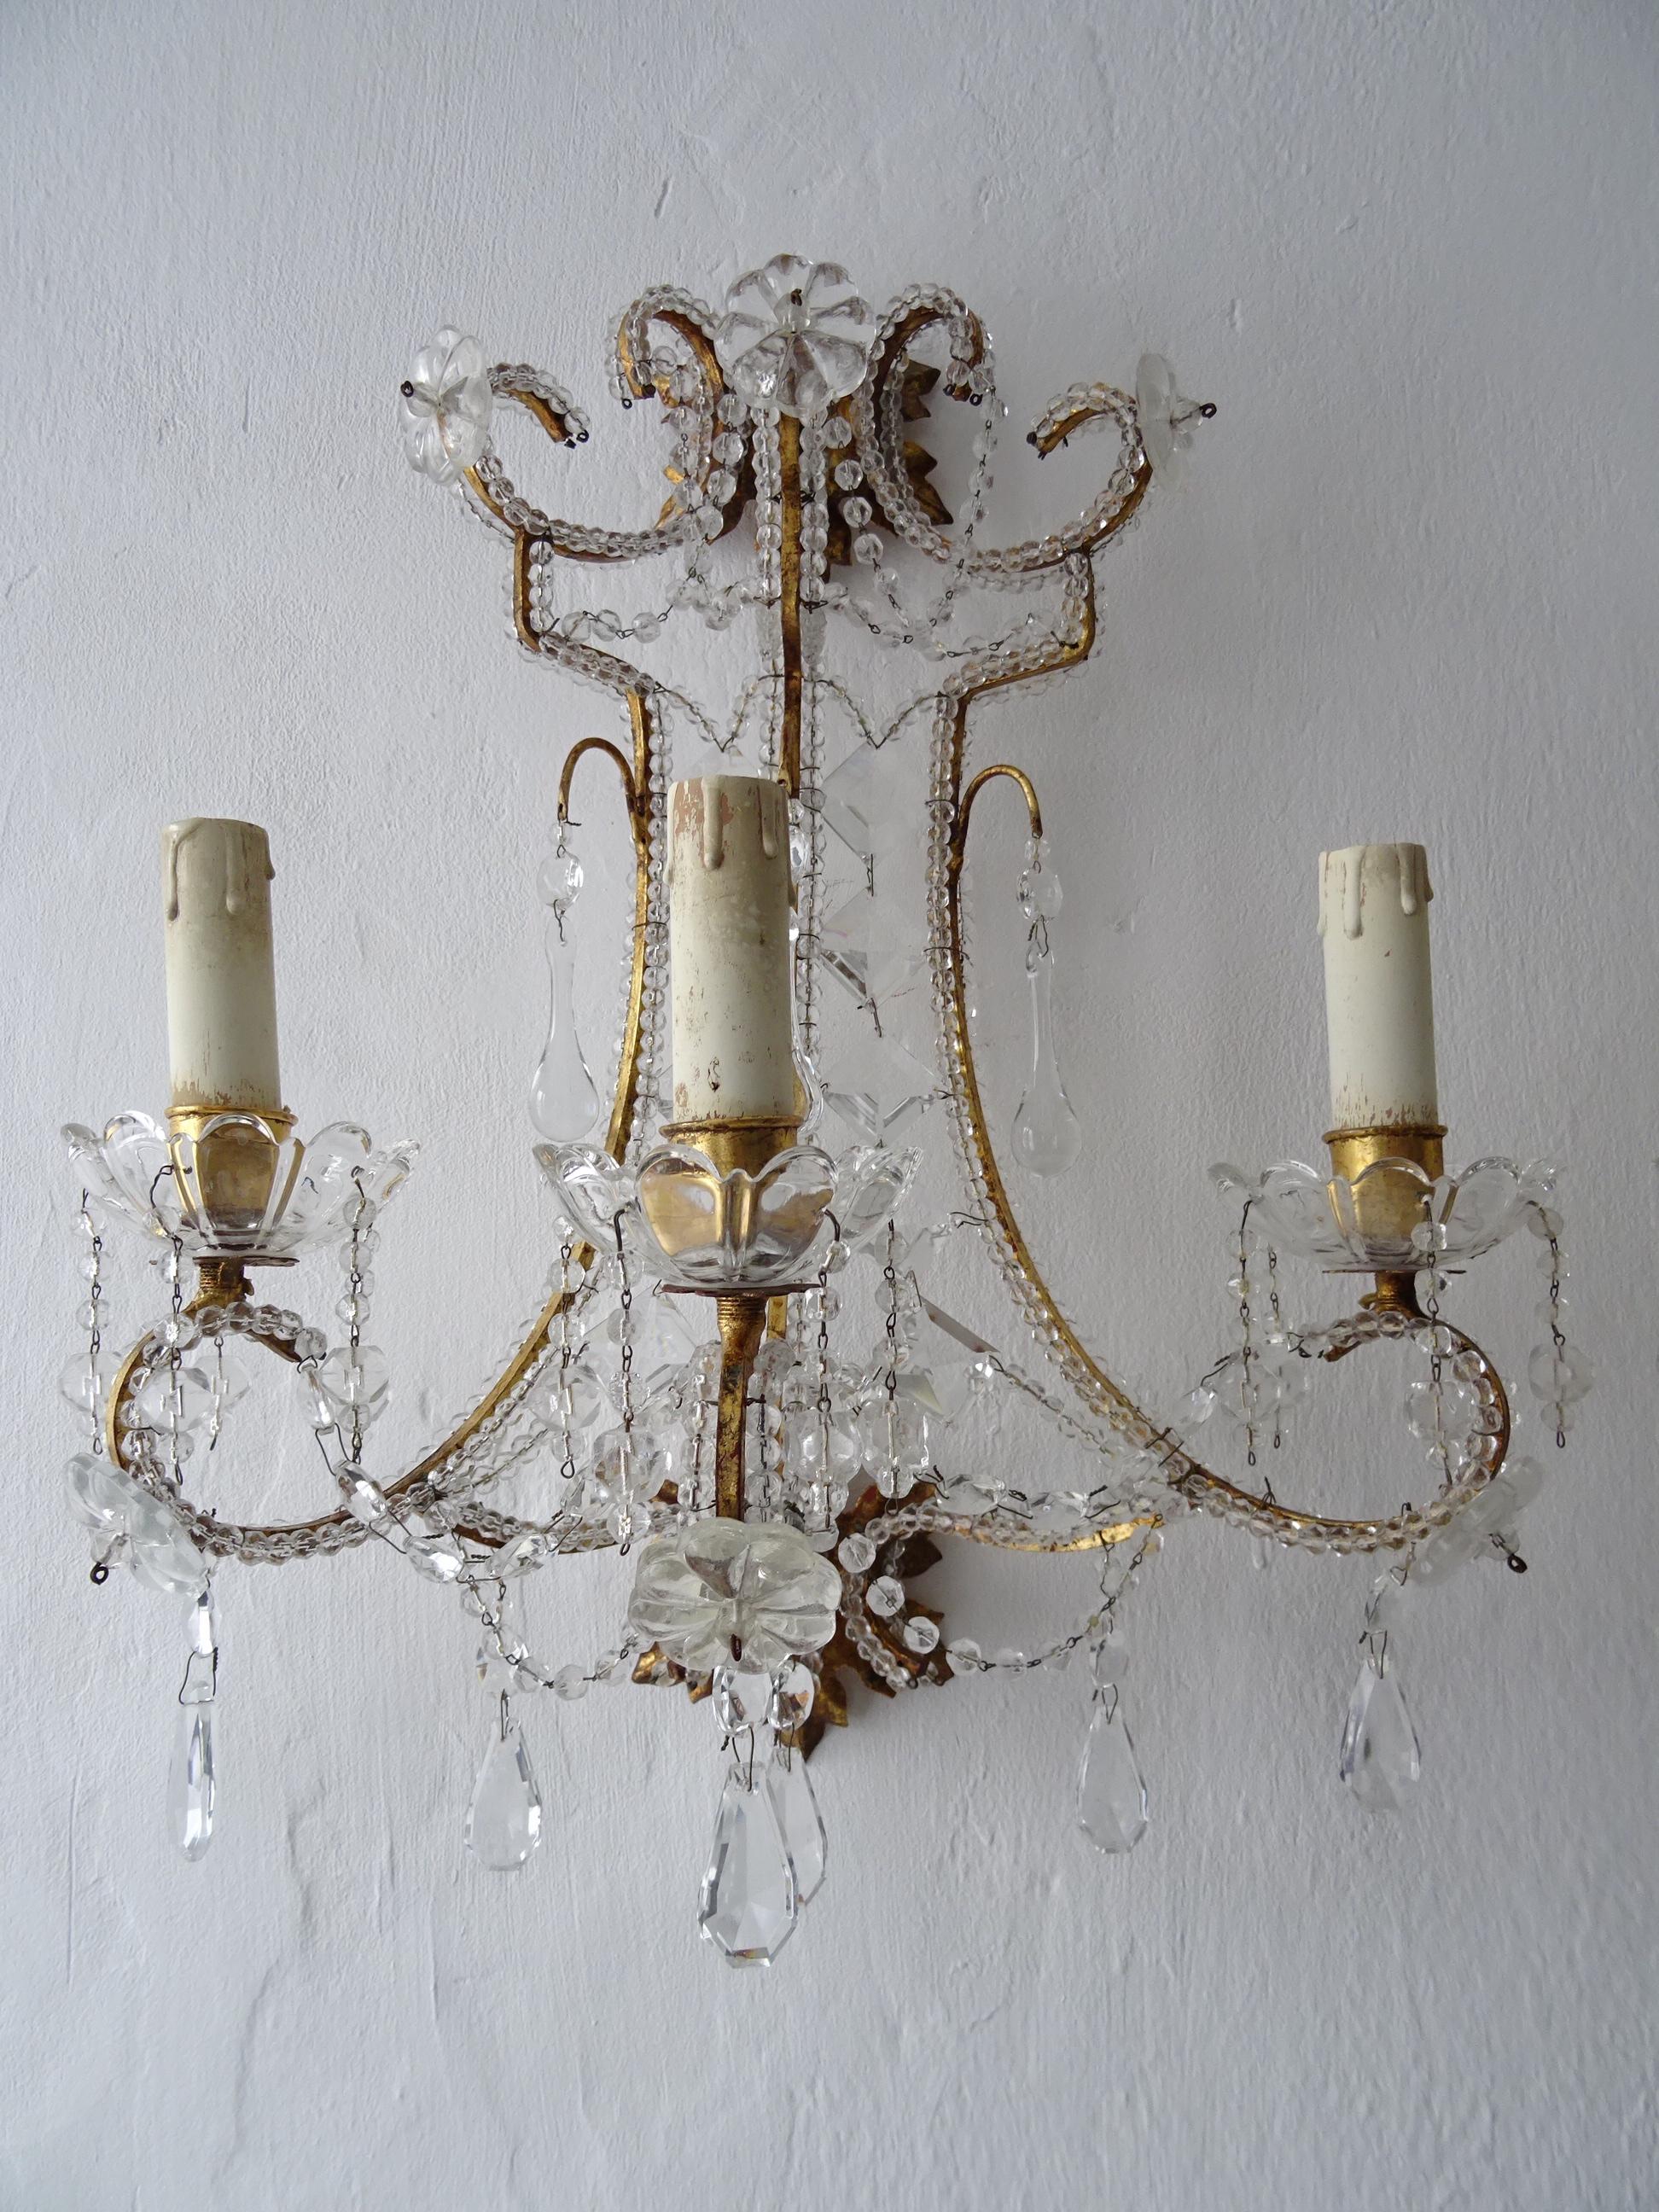 20th Century Italian Big Beaded Crystal Prisms Murano Drops Sconces Gold Gilt Metal c1900 For Sale